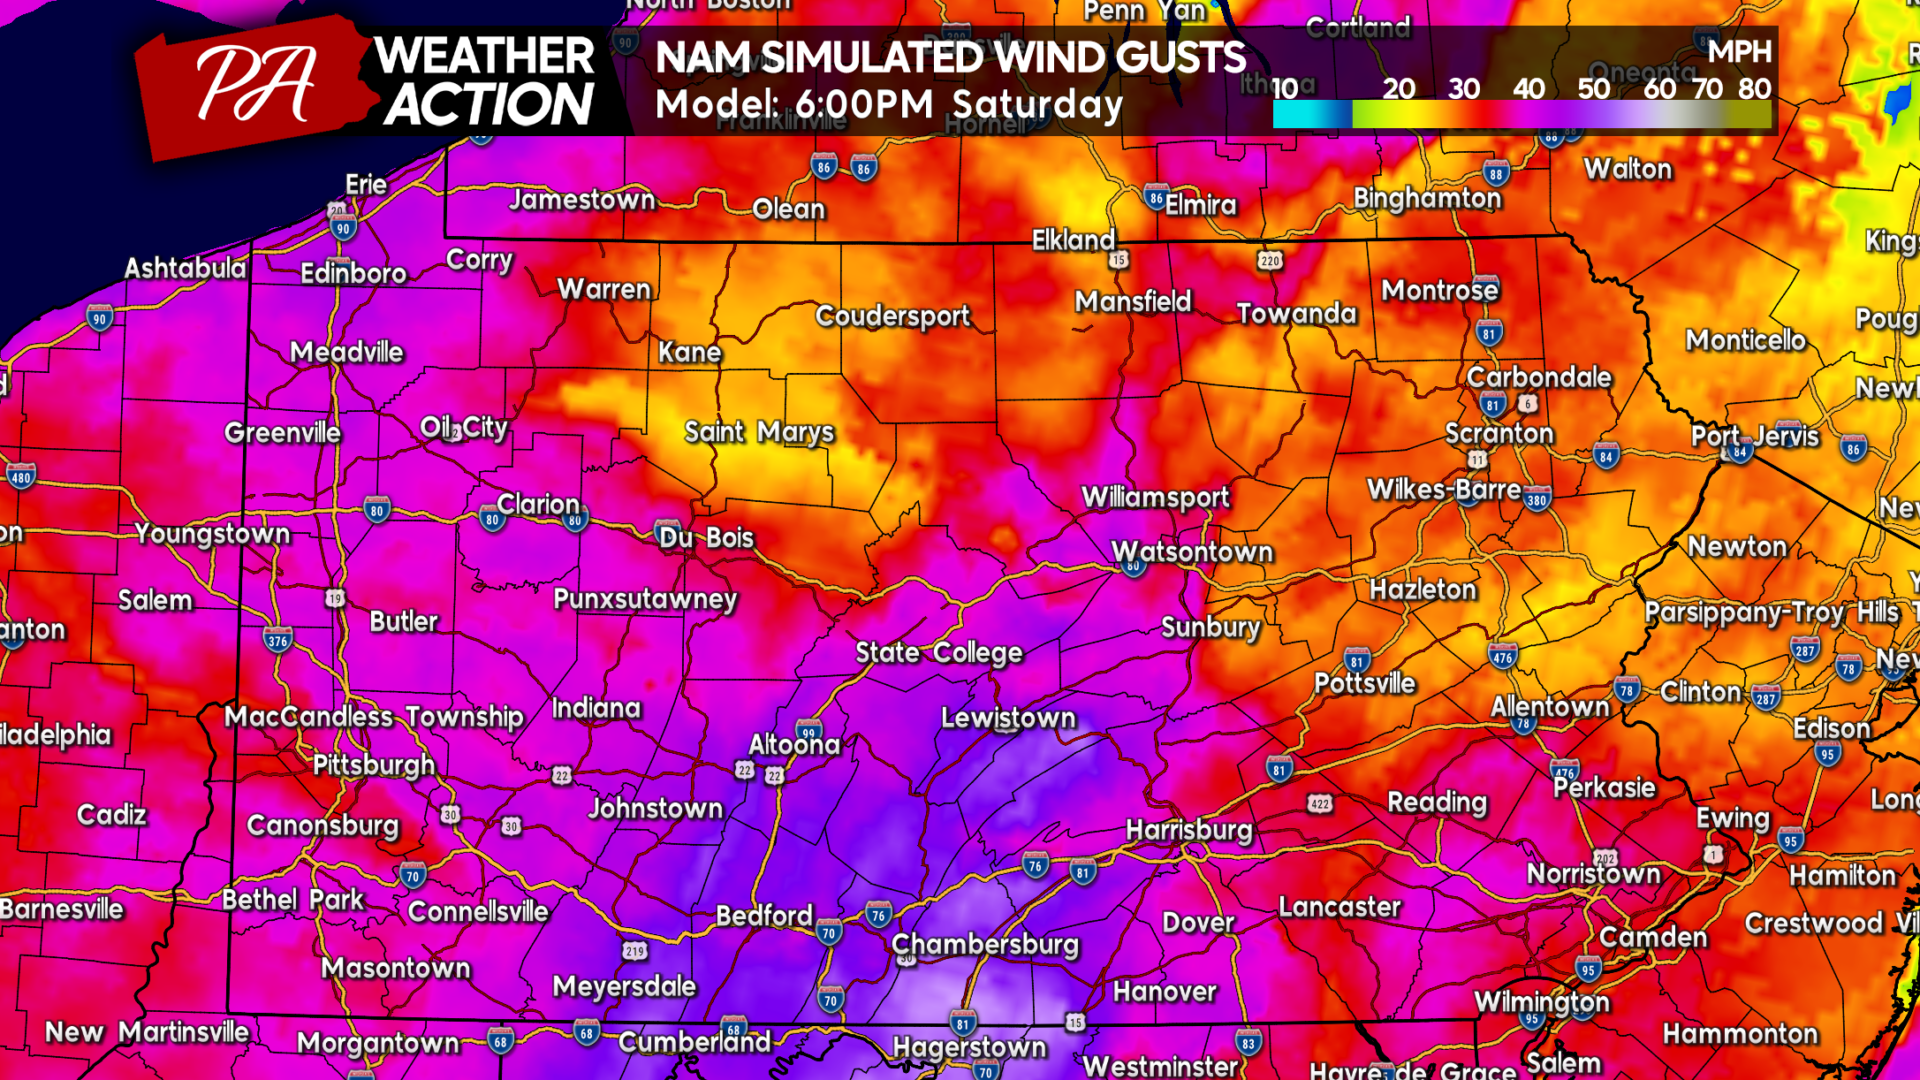 Damaging Winds Pose Power Outage Threat Saturday As Strong Cold Front Blasts Through Pennsylvania